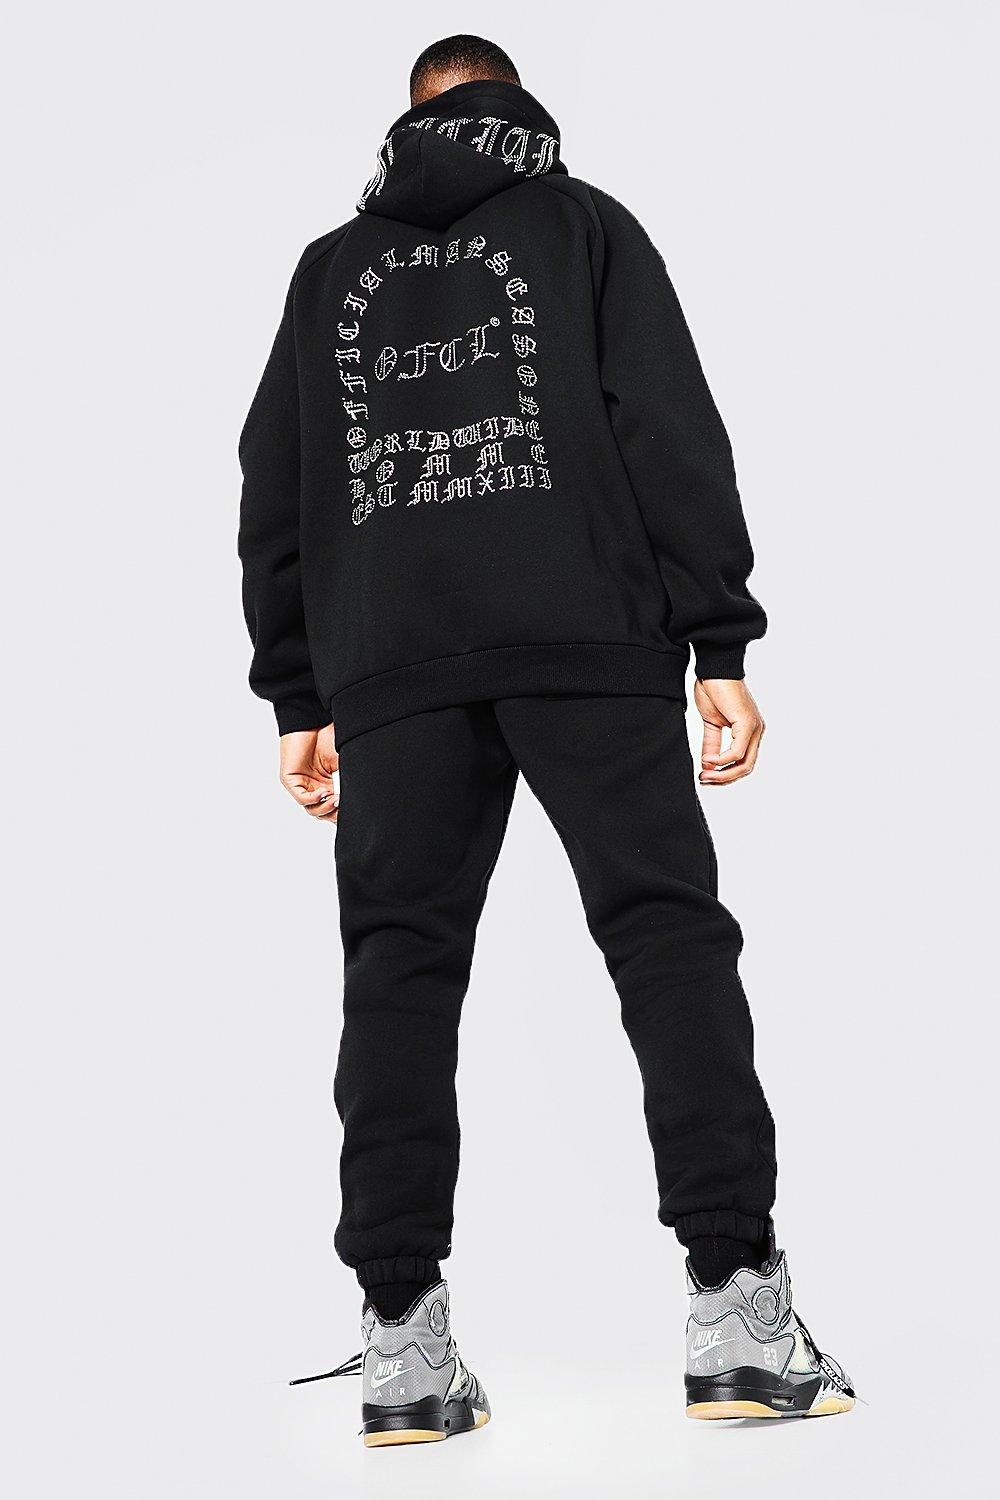 Buy Louis Vuitton Black Songoku Hoodie Luxury Brand Clothing Clothes Outfit  For M #fashion trending, by Cootie Shop